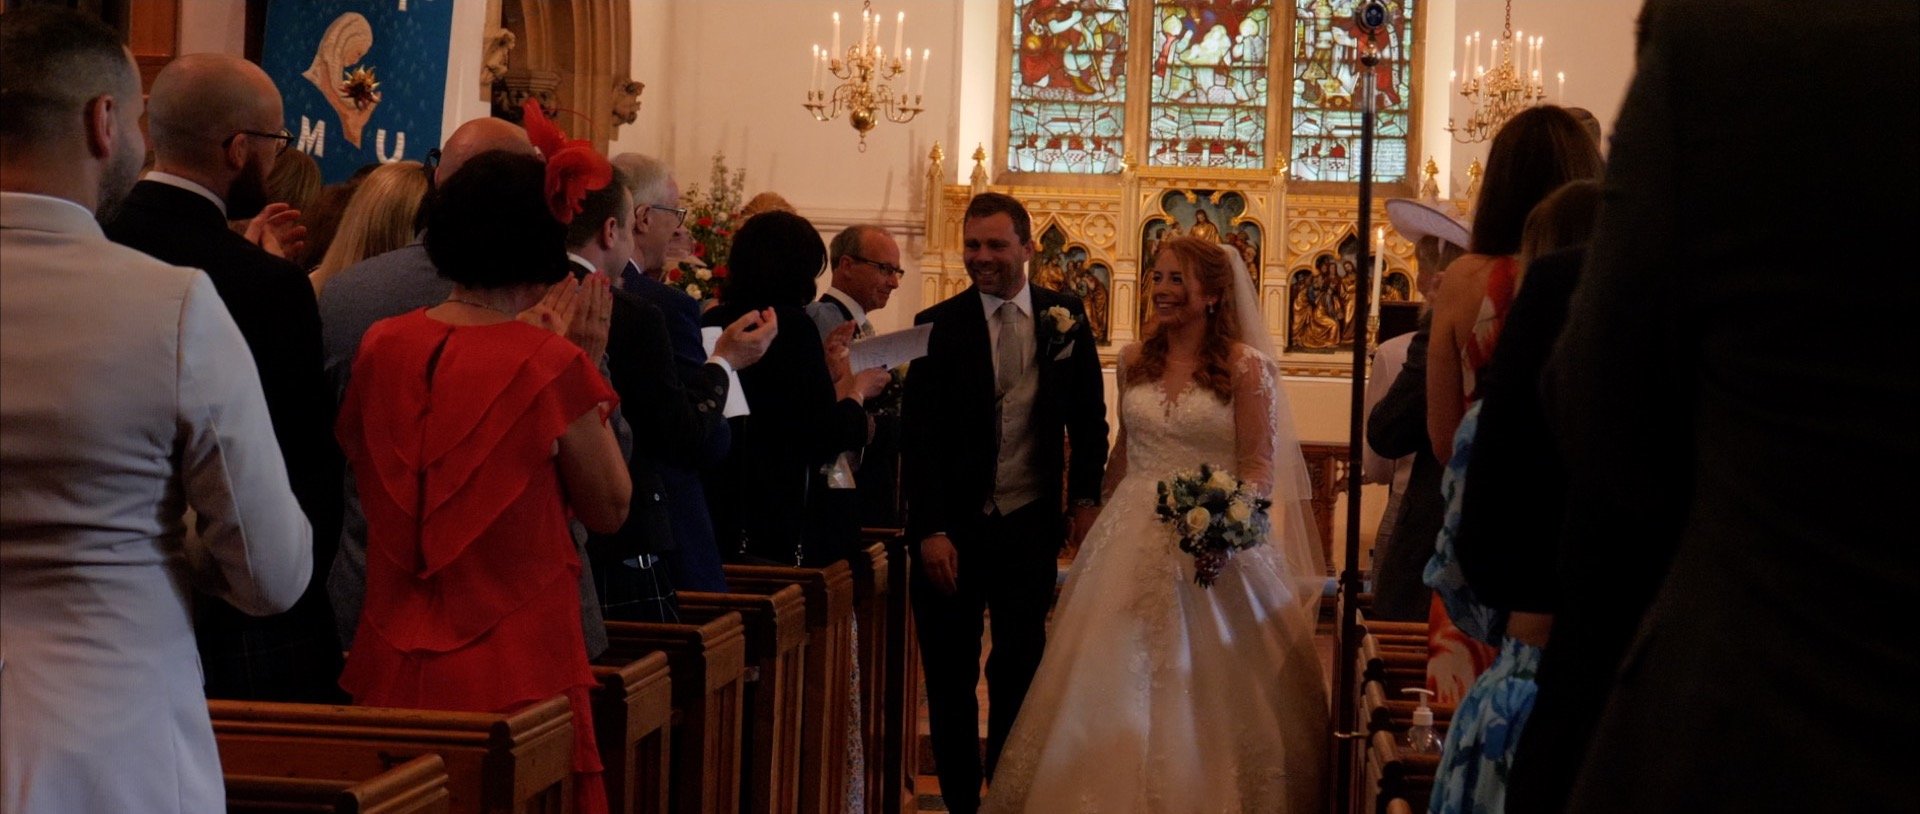 Just married and walking out of church.jpg